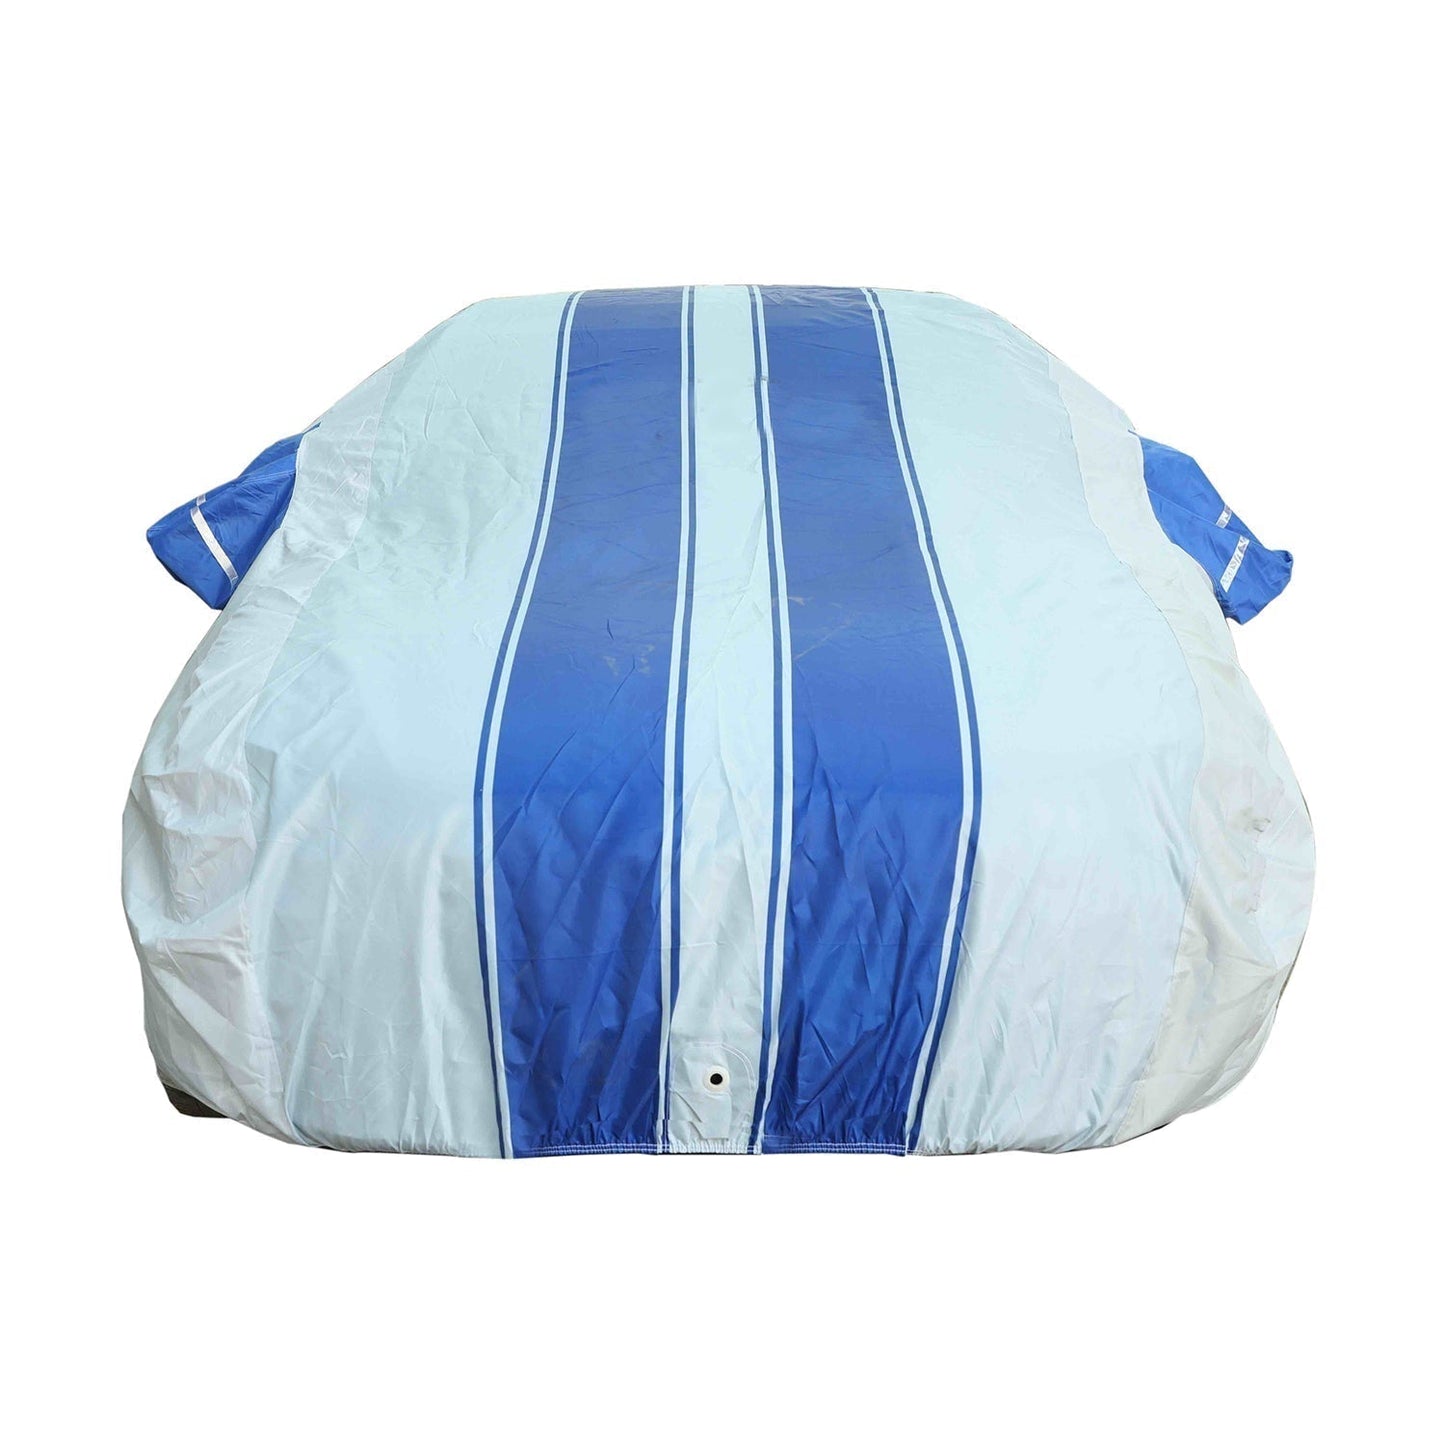 Oshotto 100% Blue dustproof and Water Resistant Car Body Cover with Mirror Pockets For Tata Tigor